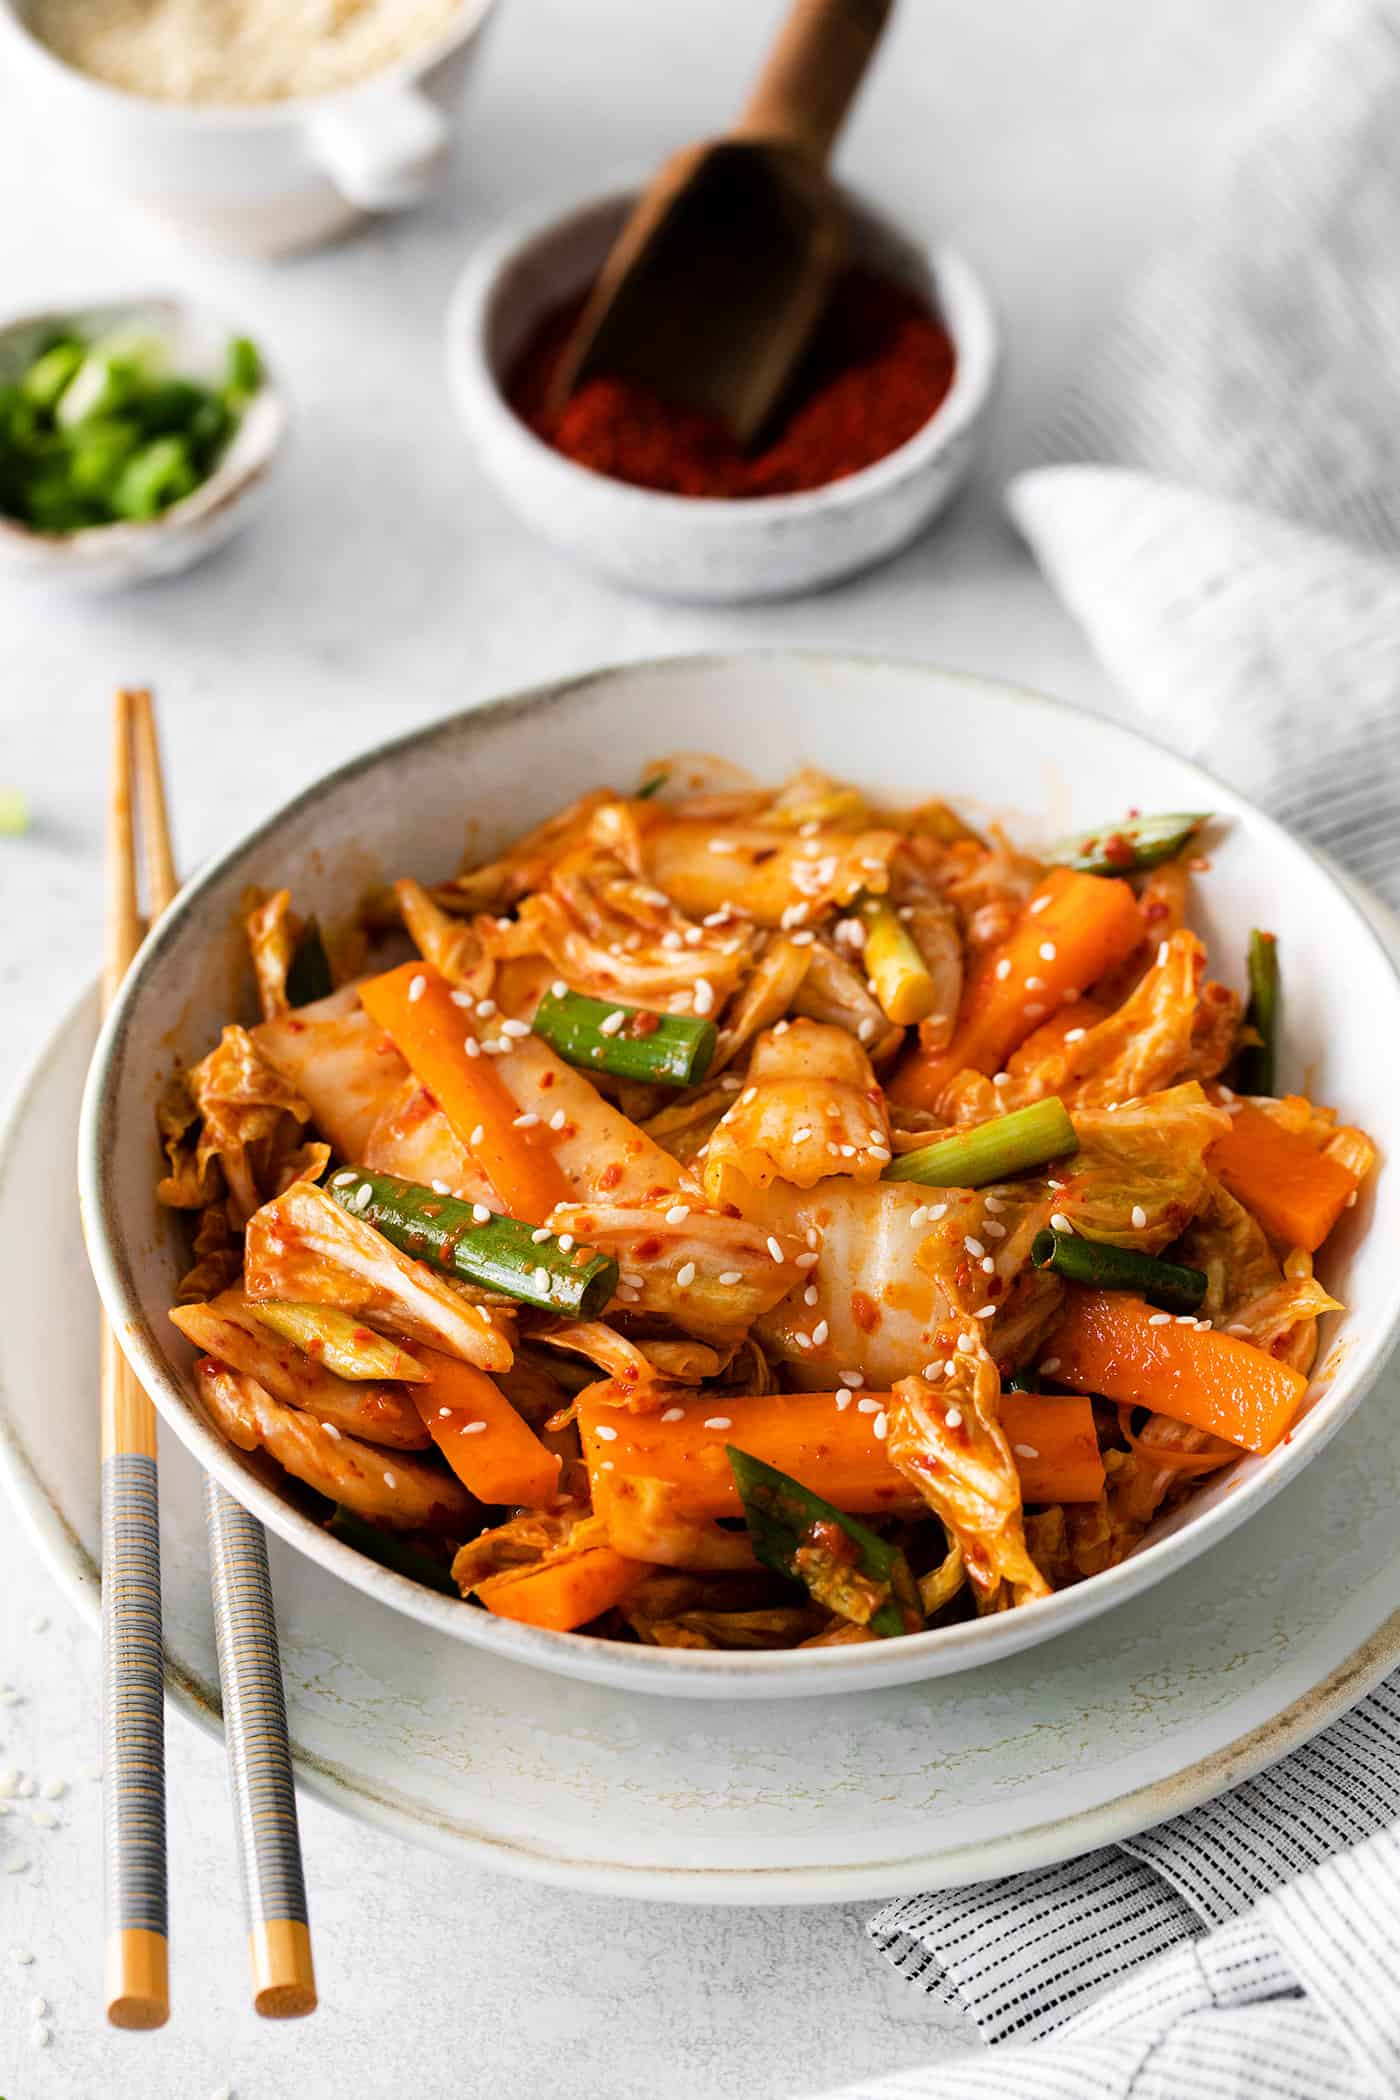 Angled view of a bowl of kimchi